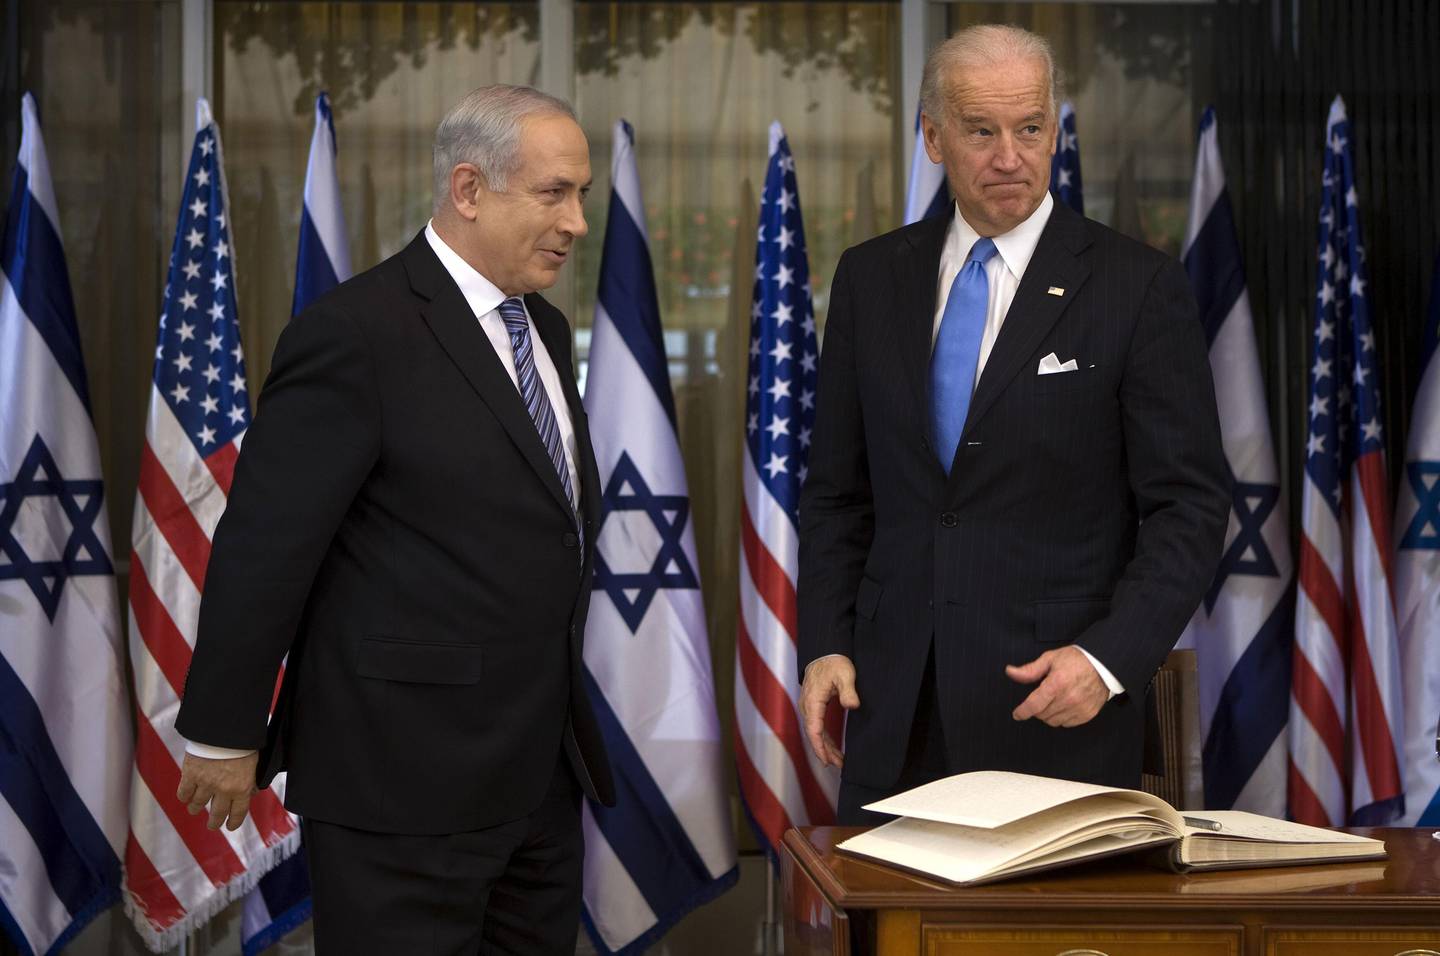 US Vice President Joe Biden (R) stands alongside Israeli Prime Minister Benjamin Netanyahu (L) prior to their meeting at the Prime Minister's residence in Jerusalem on March 9, 2010. US Vice President Joe Biden was meeting top Israeli officials, throwing his weight behind a renewal of Middle East peace talks more than a year after negotiations shuddered to a halt. AFP PHOTO/DAVID FURST